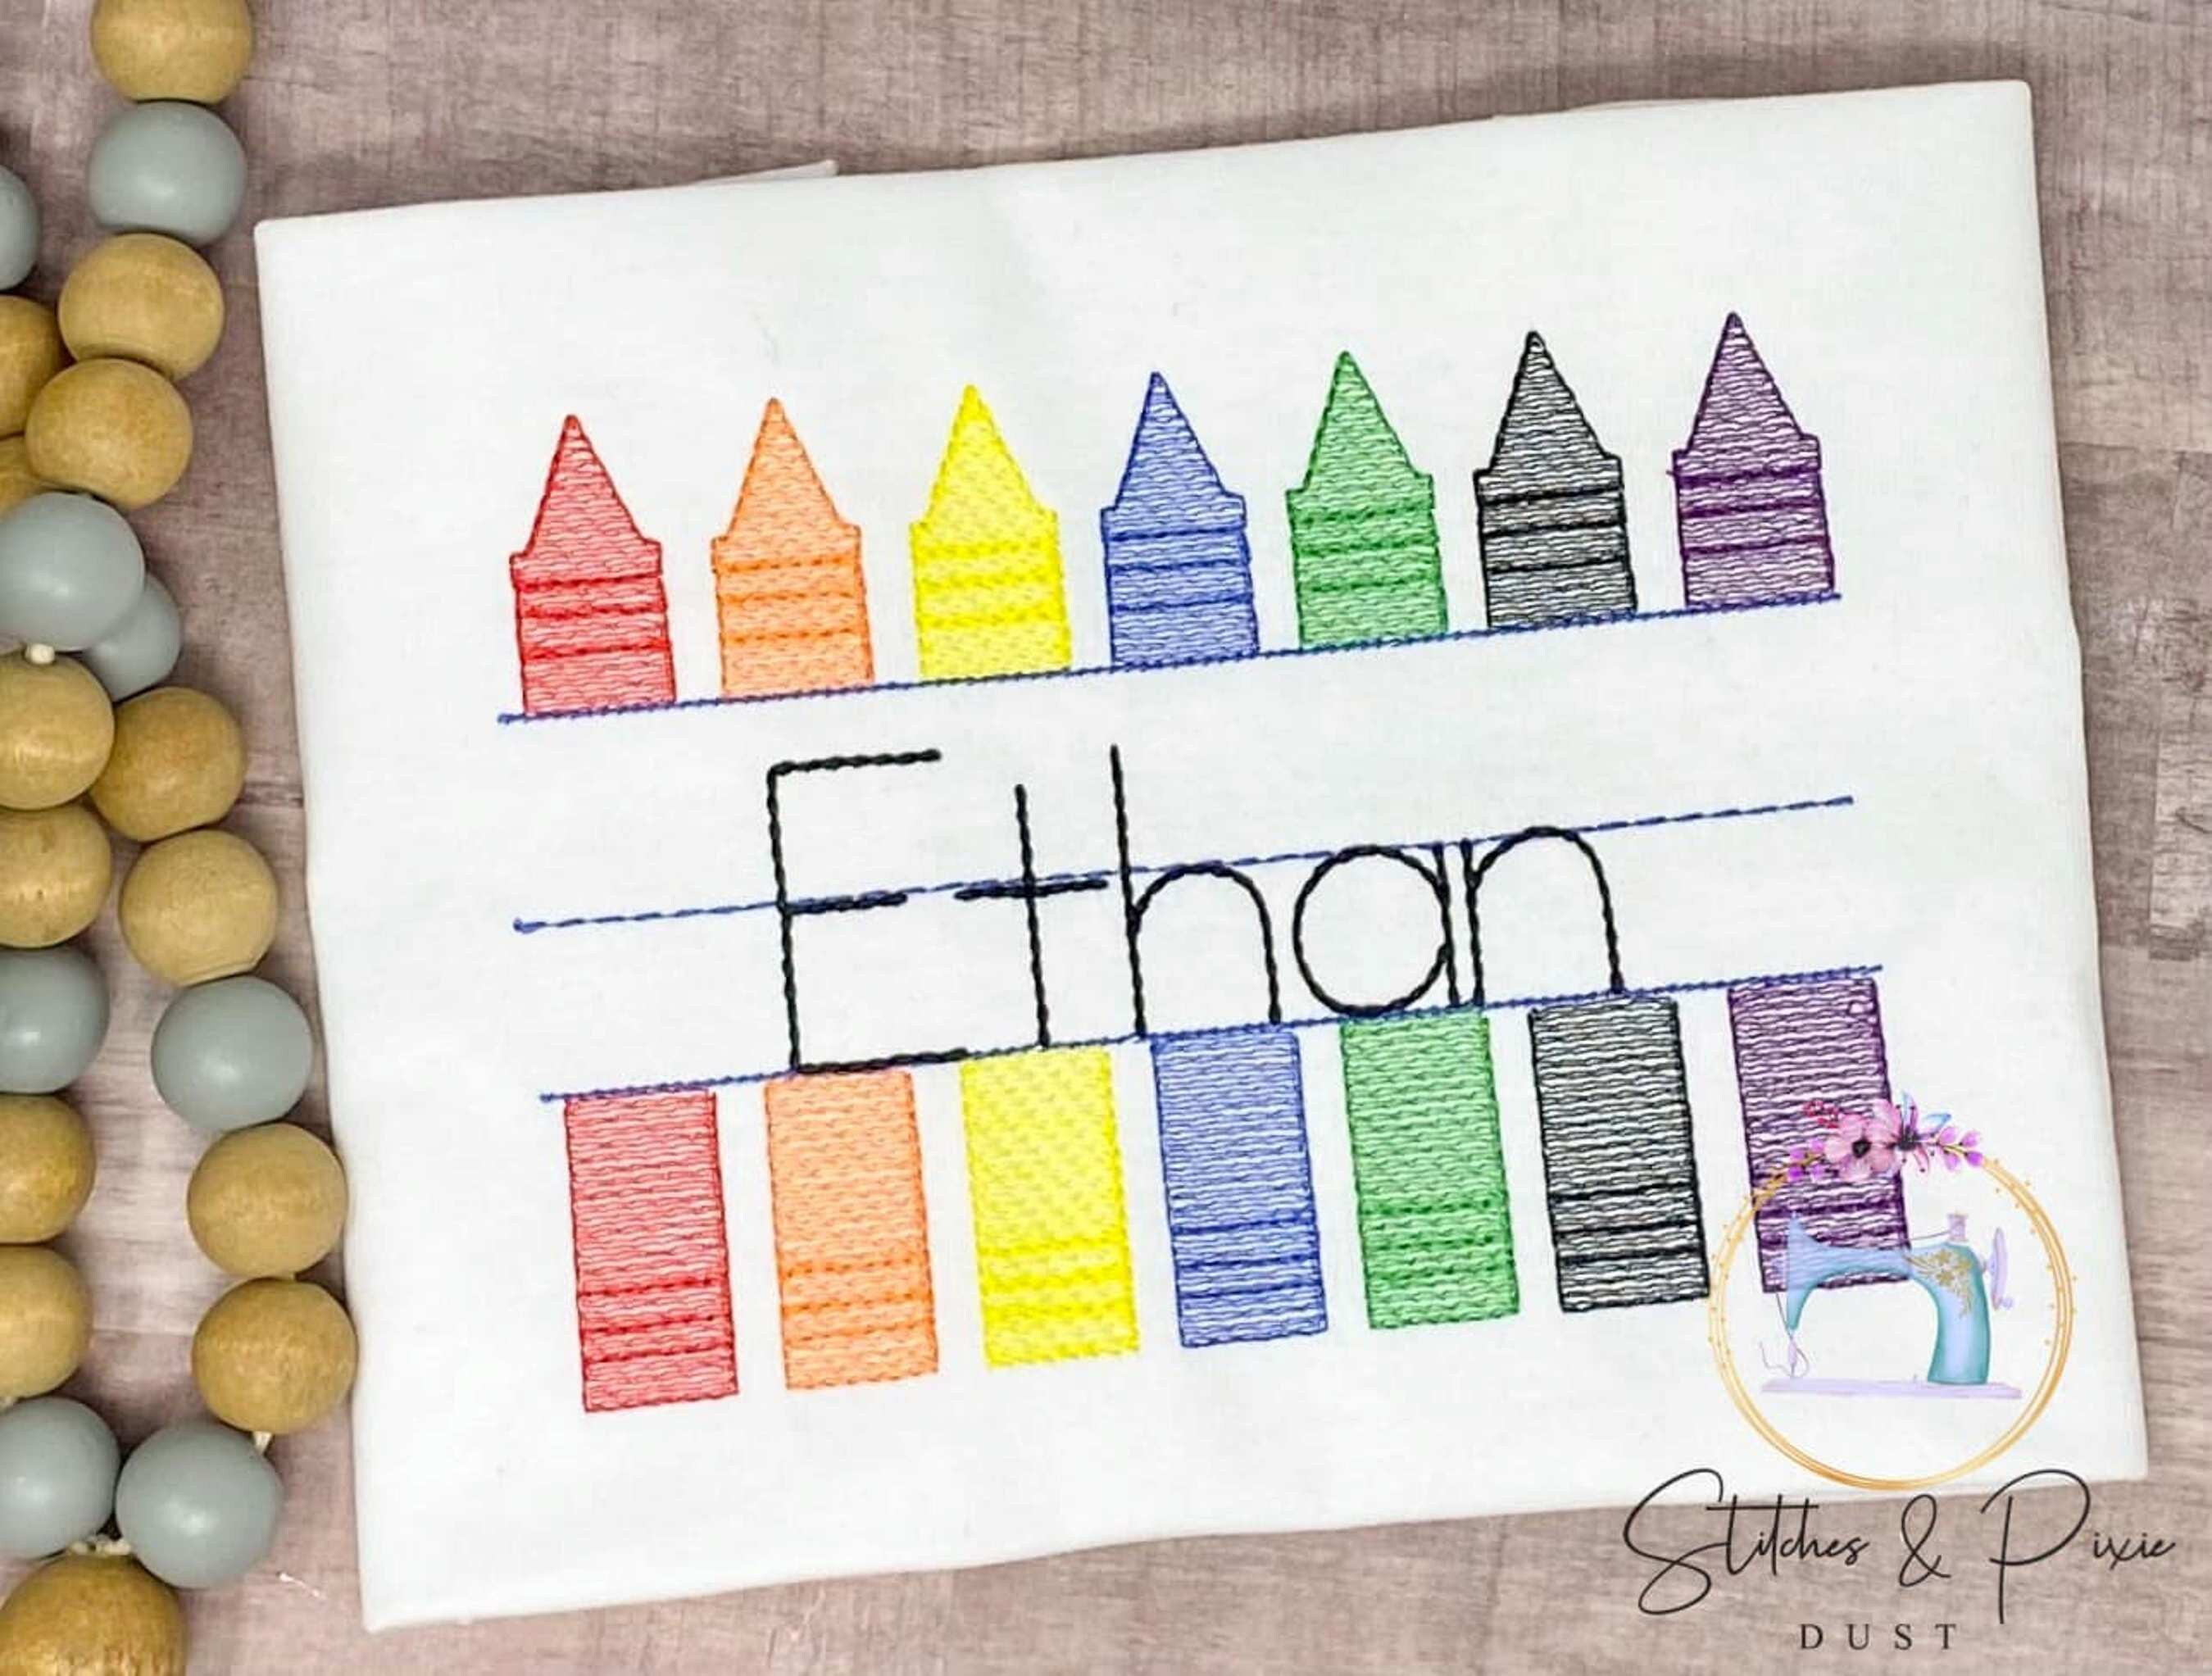 Cut Crayon Heart MINI 5x7, Framed or Unframed Wall Art, Custom Baby Gift,  Personalized Crayon Hearts, PINK and PURPLE 